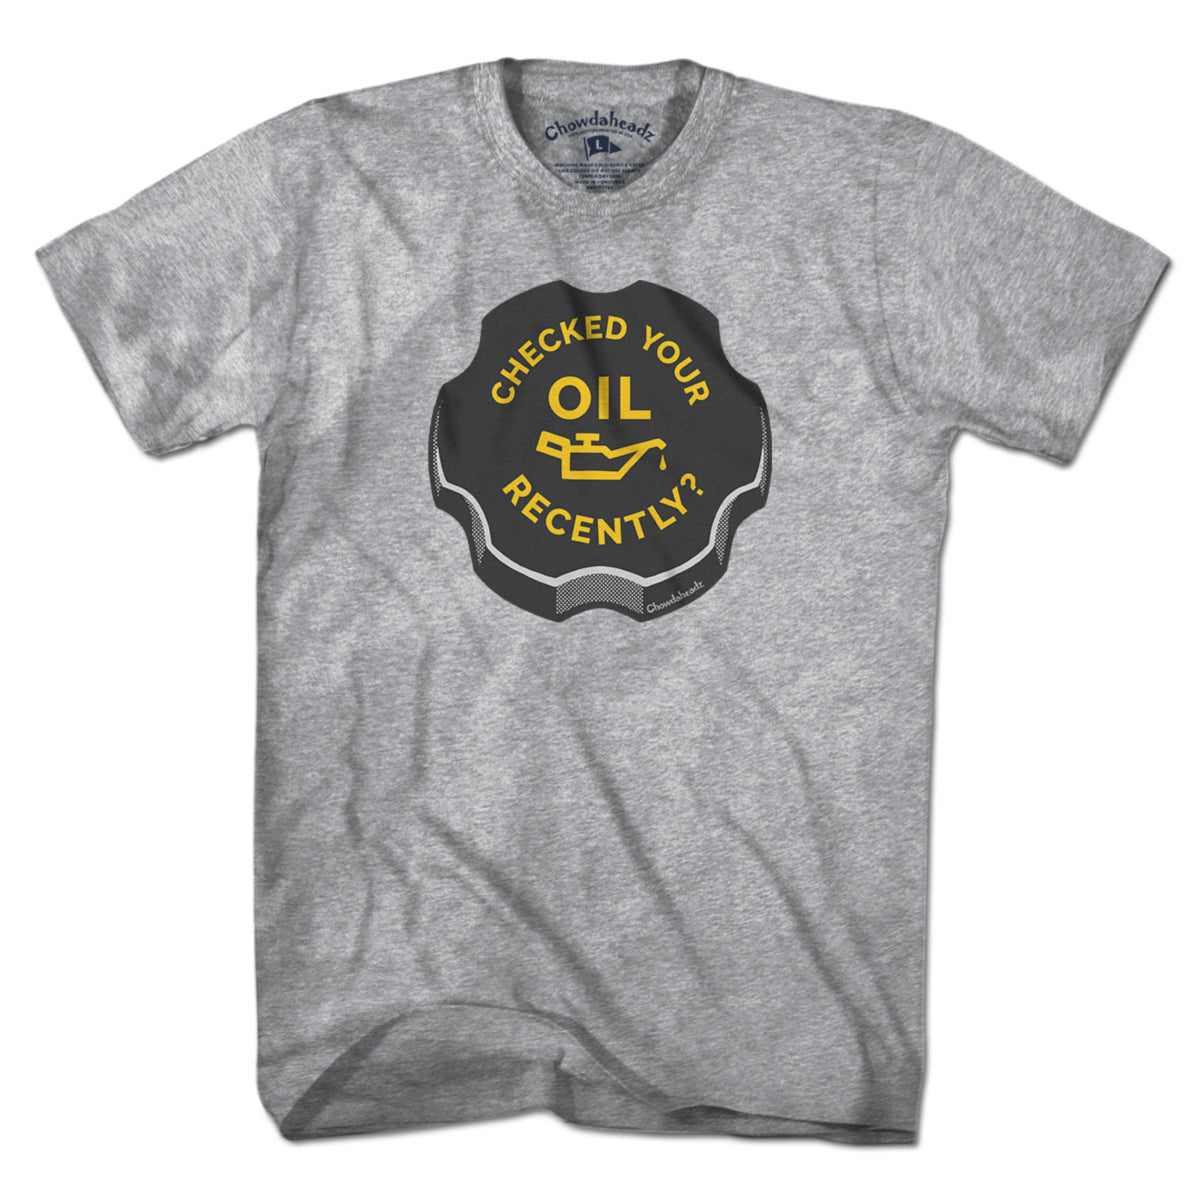 Checked Your Oil Recently? T-Shirt - Chowdaheadz